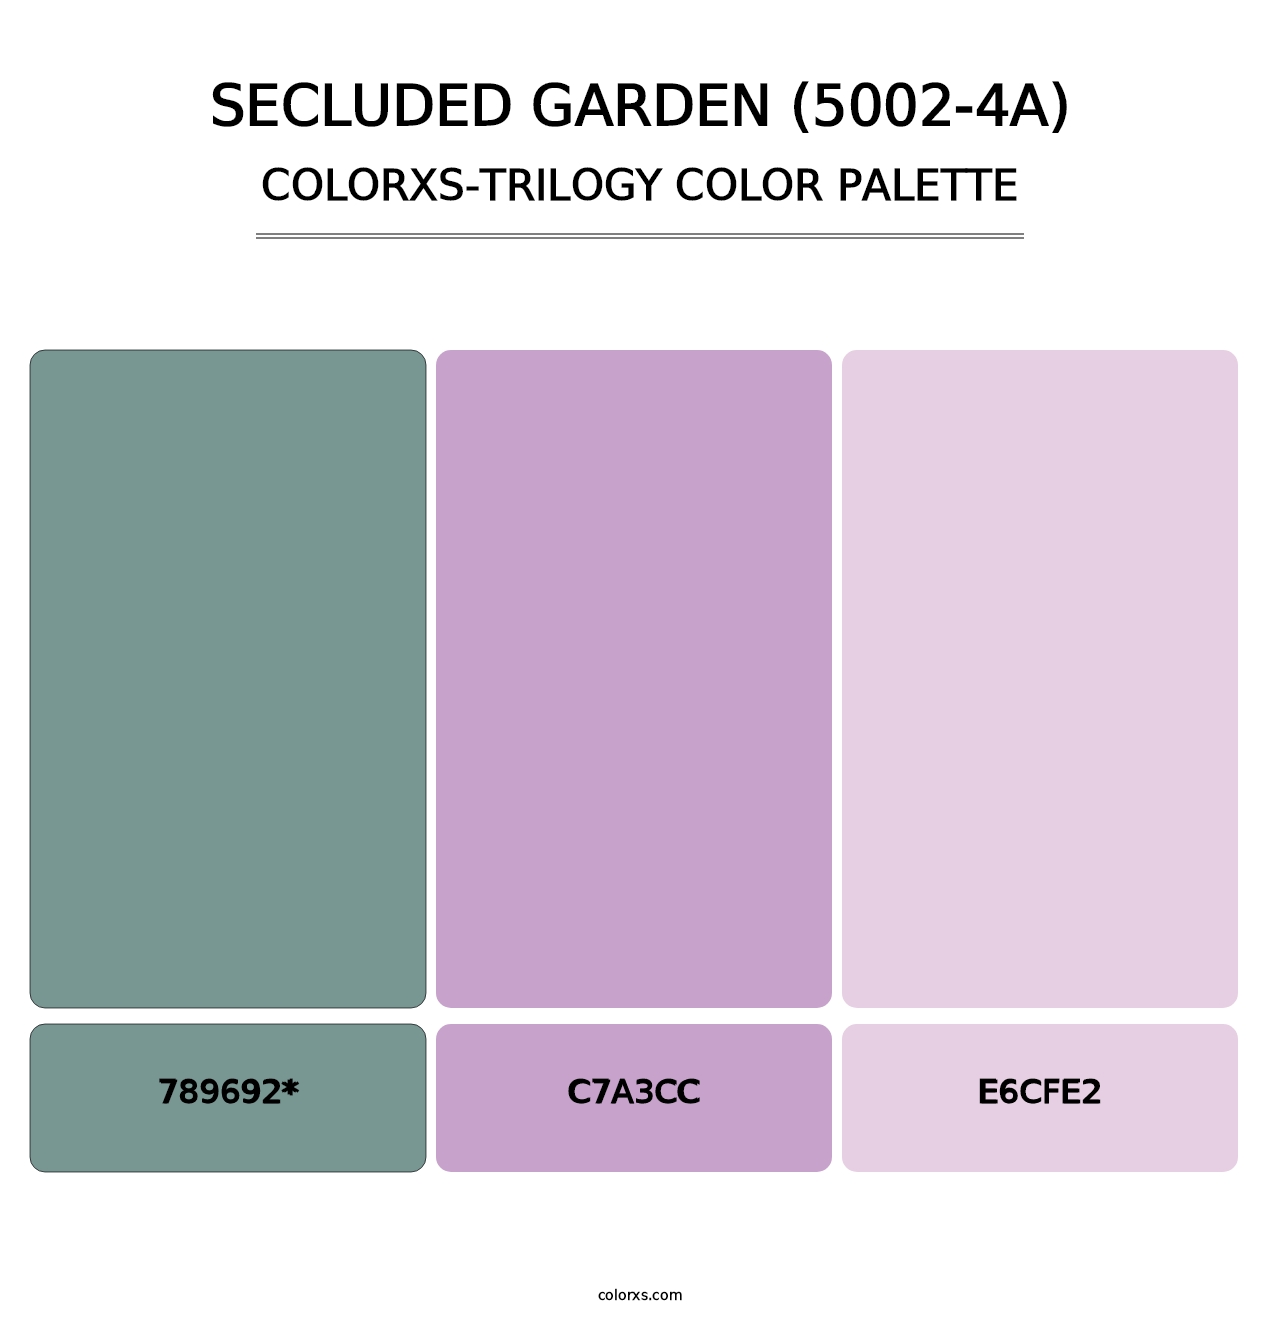 Secluded Garden (5002-4A) - Colorxs Trilogy Palette